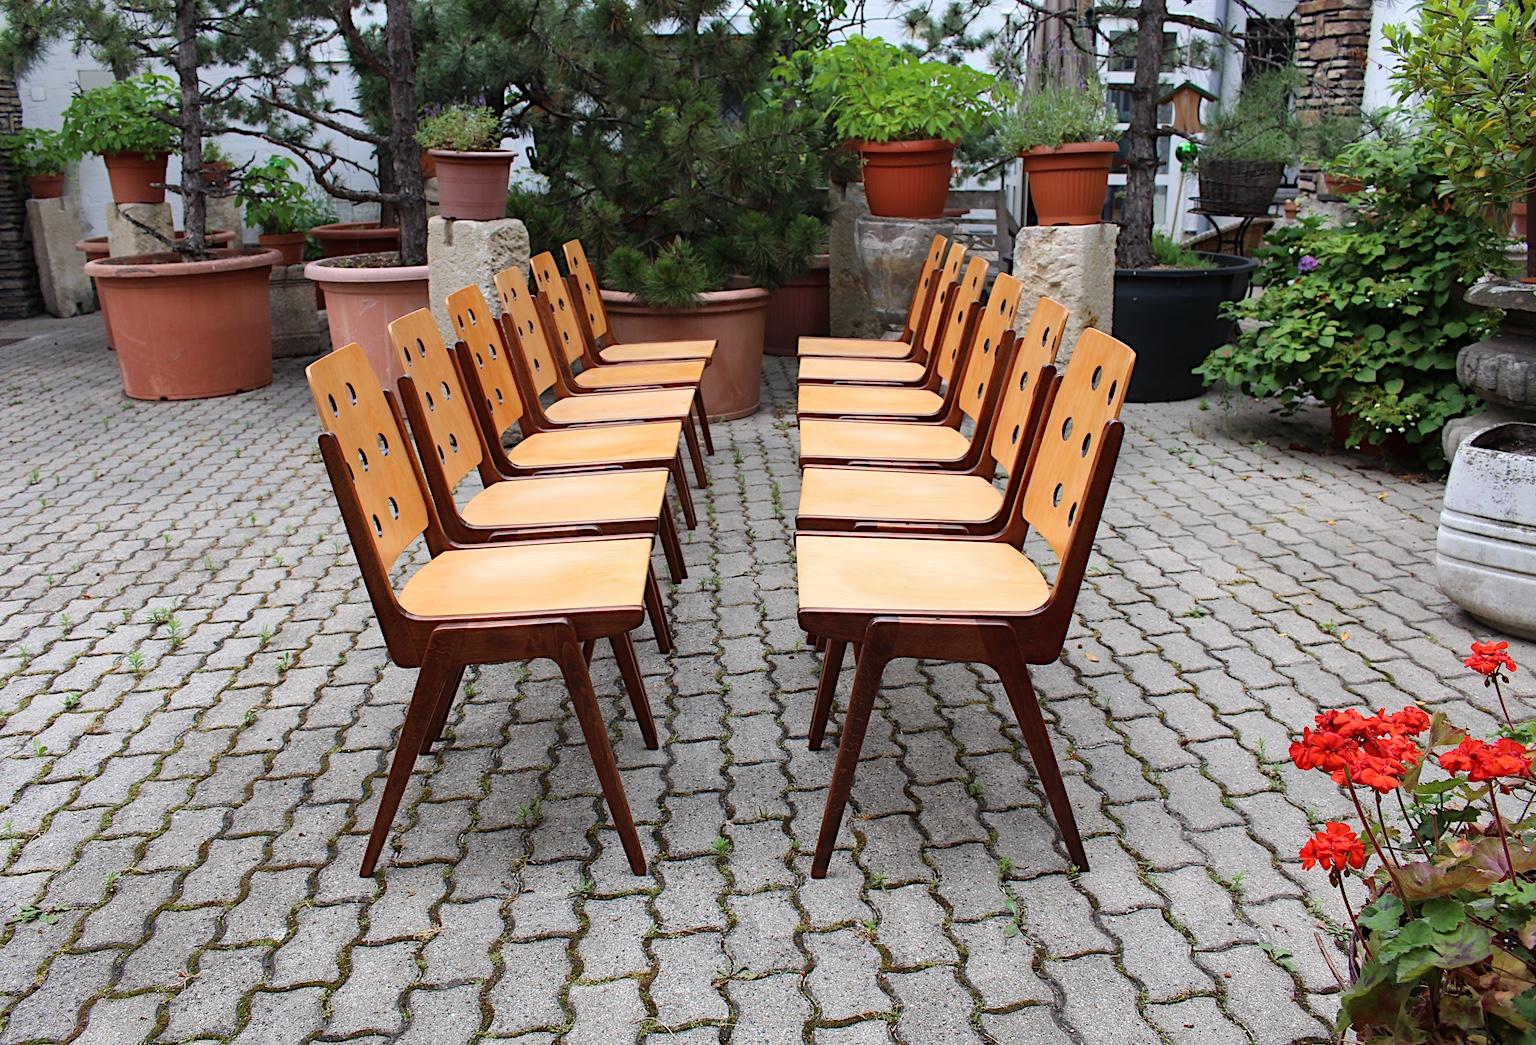 Mid-Century Modern vintage set of 12 bicolor beechwood dining chairs, which were designed by Franz Schuster and executed by Wiesner Hager, Austria, 1950s.
The frame was made of solid brown stained and natural lacquered beechwood. Seat and back were